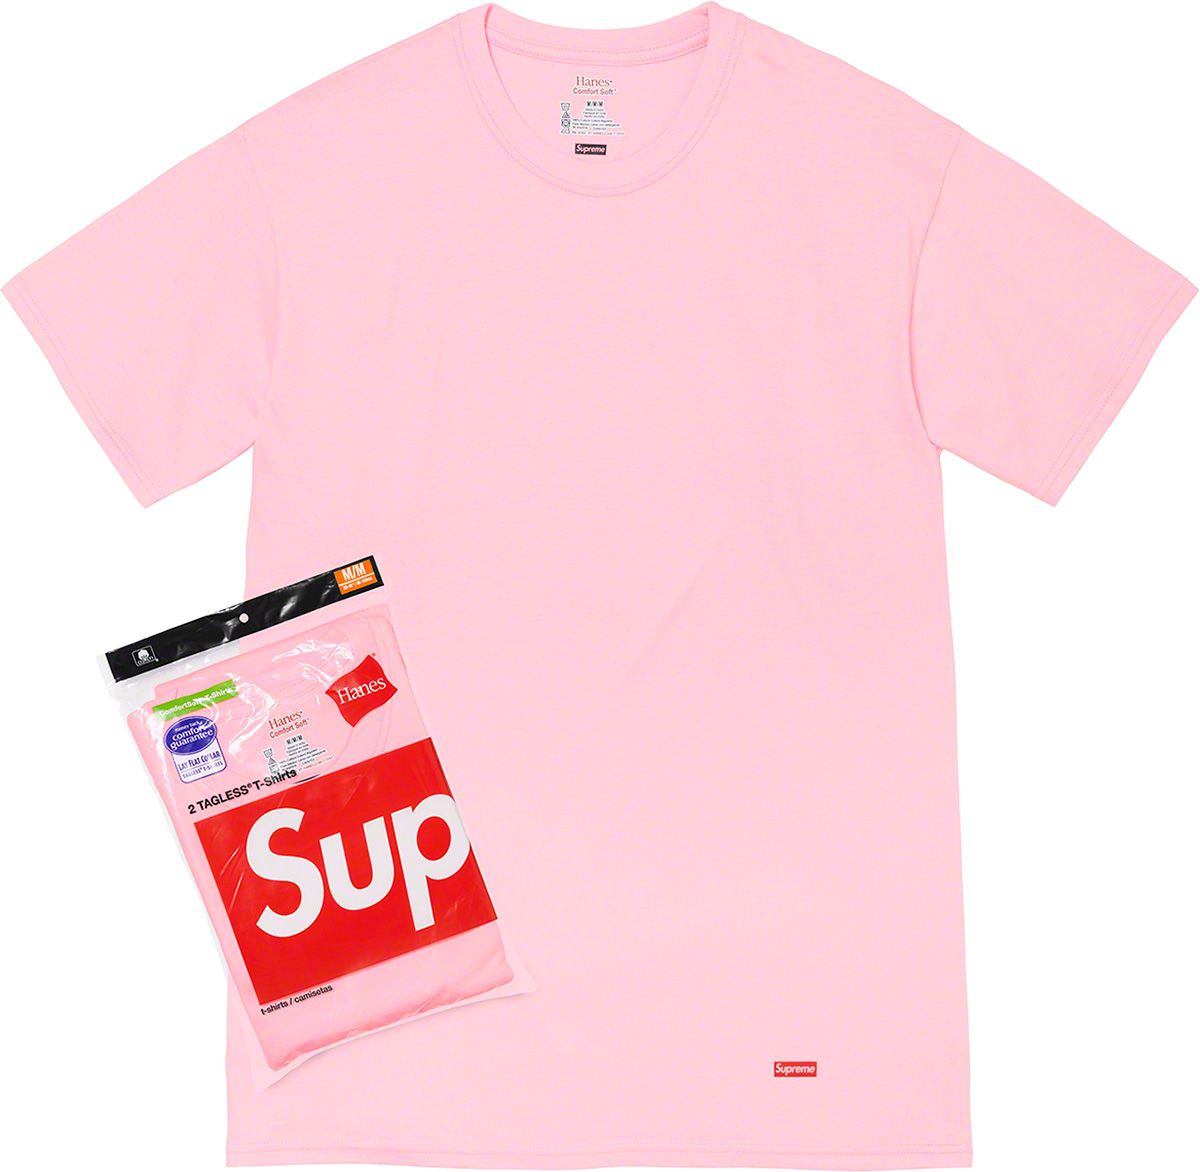 Supreme®/Hanes® Tagless Tees (2 Pack) - Fall/Winter 2021 Preview